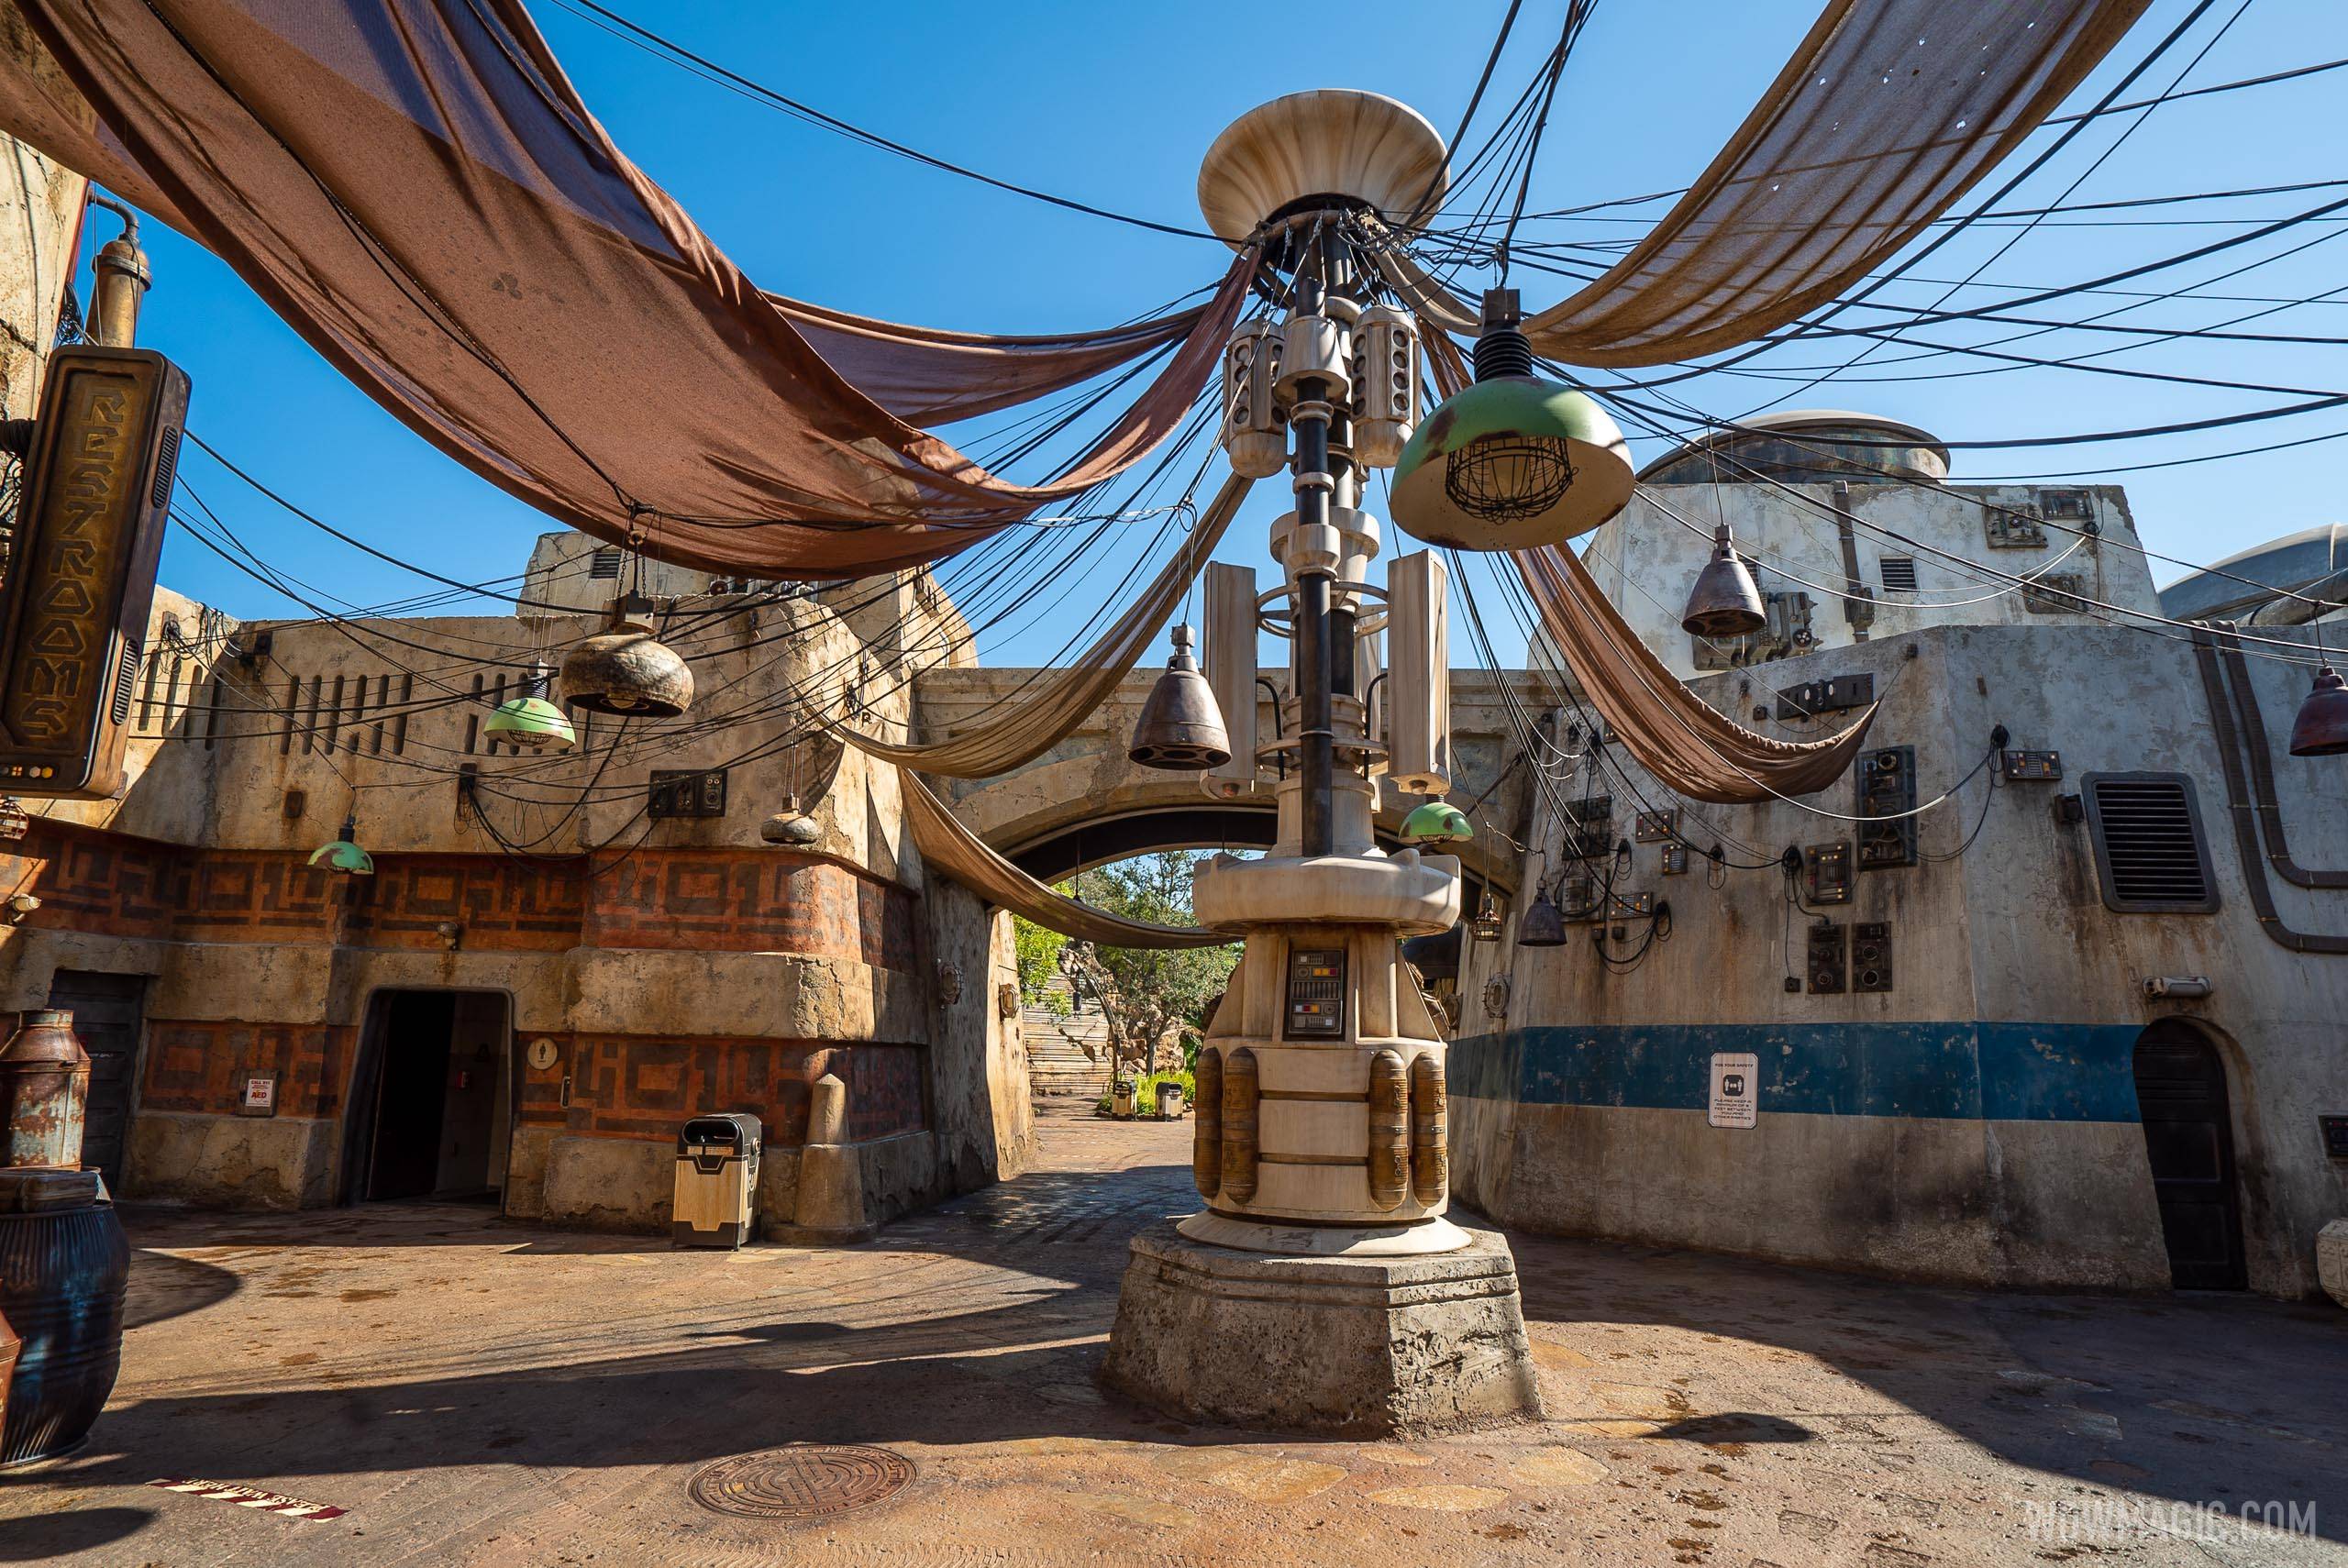 Disney's Hollywood Studios opens 30 minutes earlier than its normal